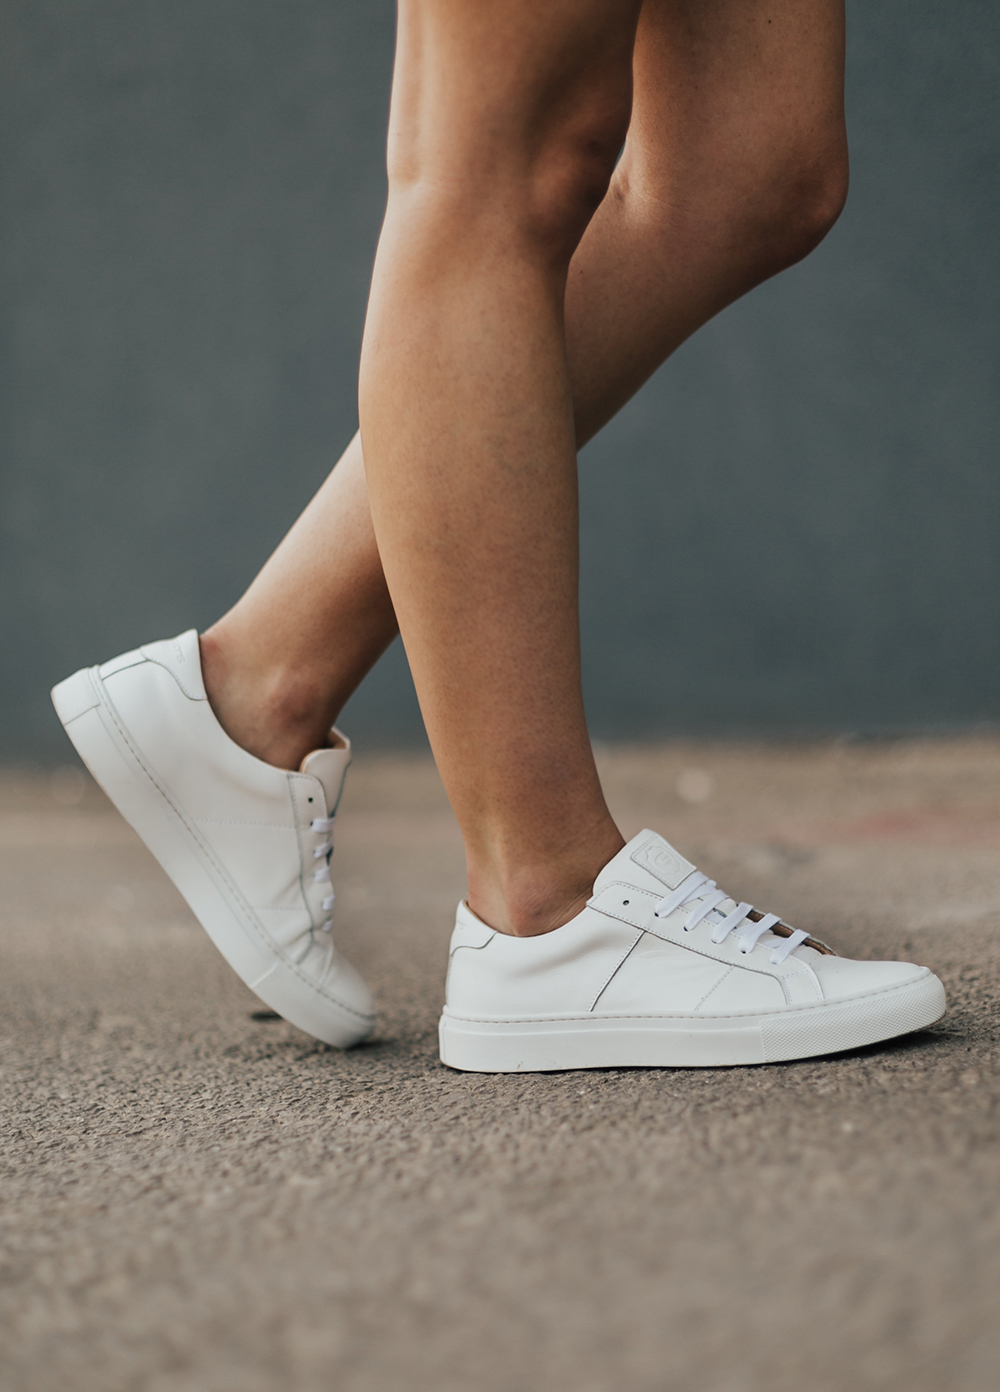 greats royale white sneakers